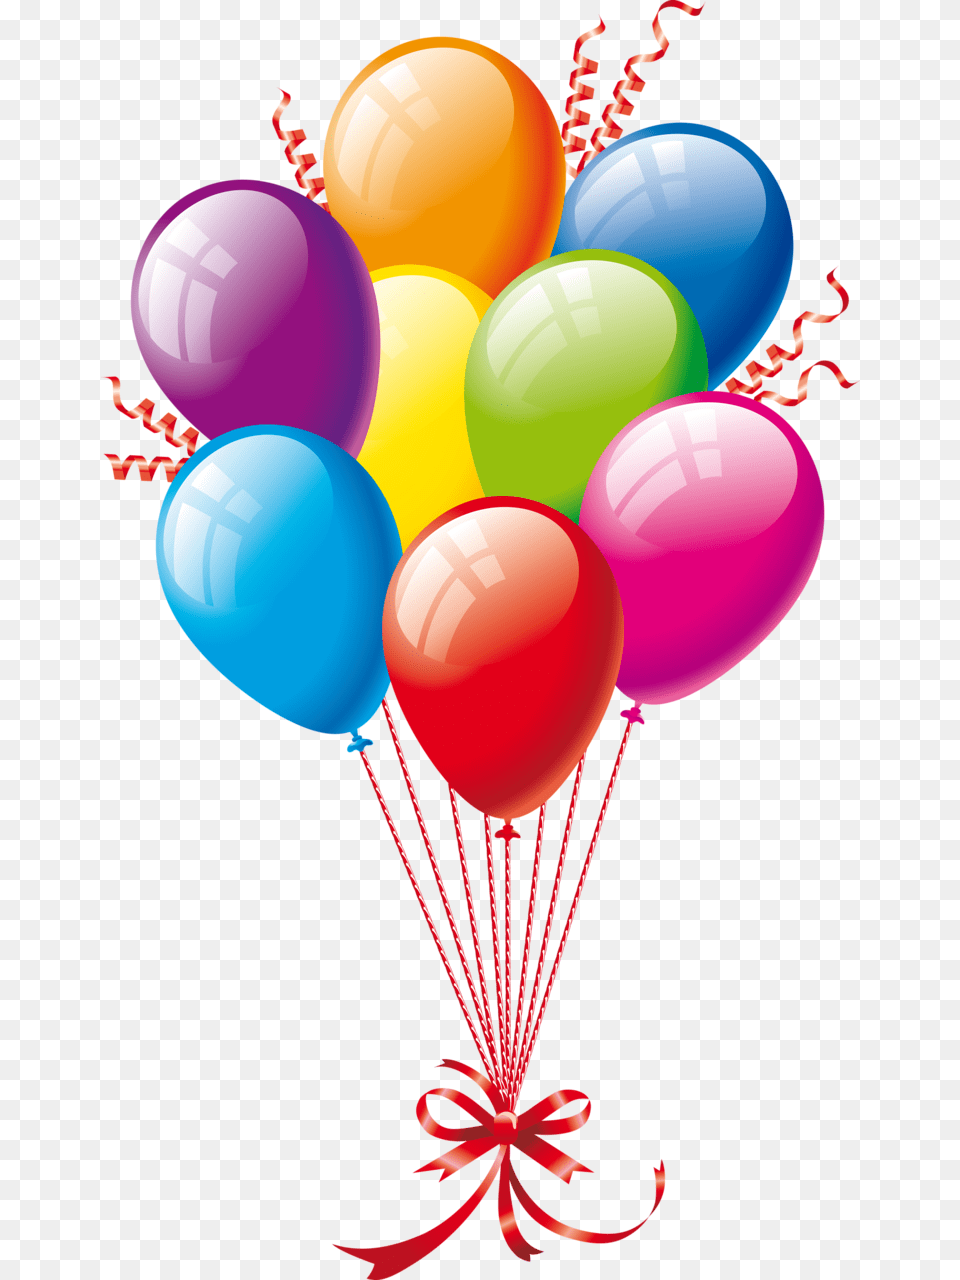 Happy Birthday Background Clipart Download Transparent Clipart Balloons, Balloon, Ball, Sport, Volleyball Png Image